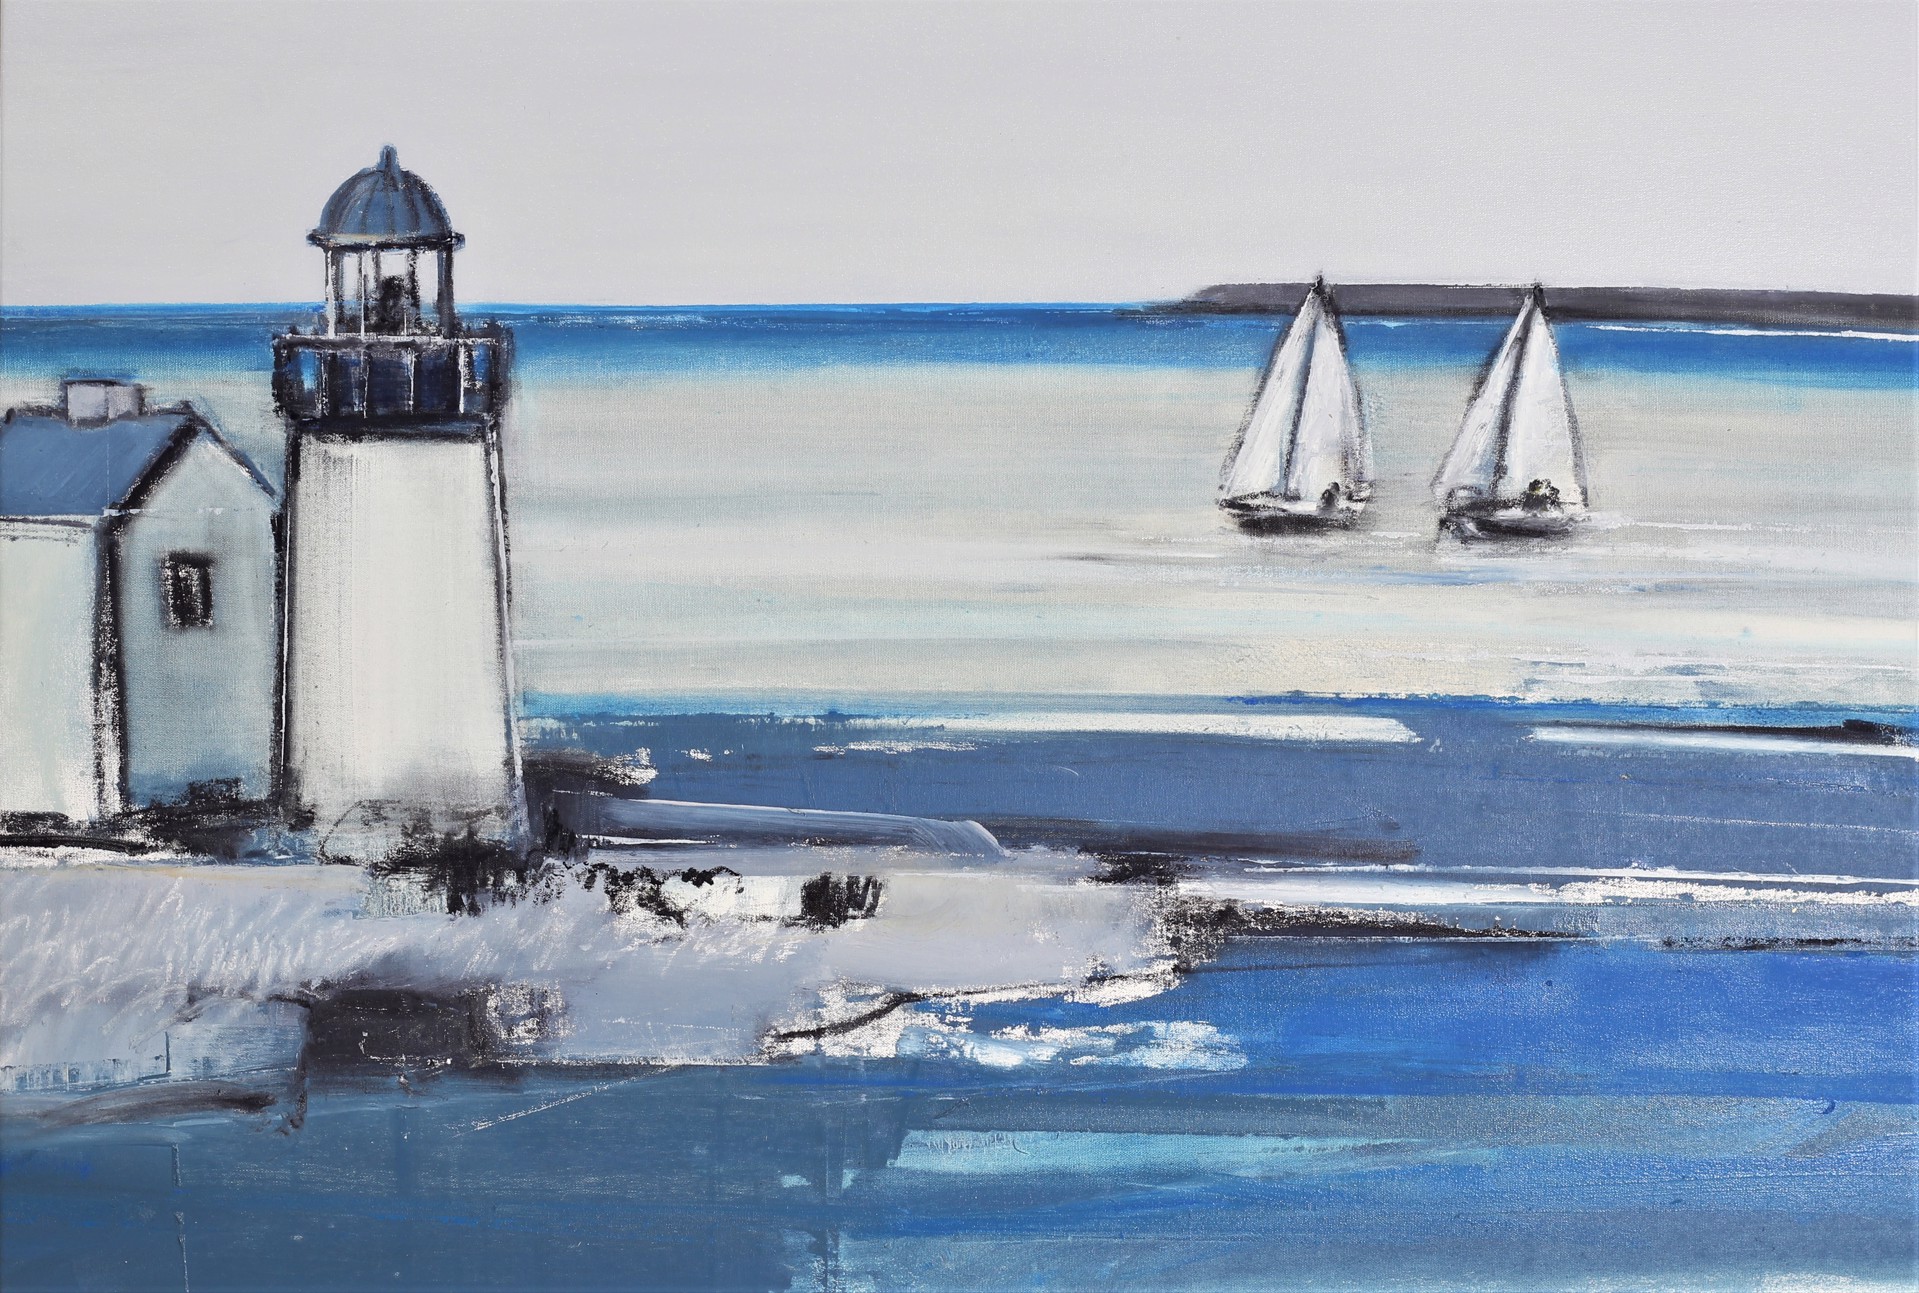 GREAT WIND FOR A SAIL by CHRISTINA THWAITES (Landscape)